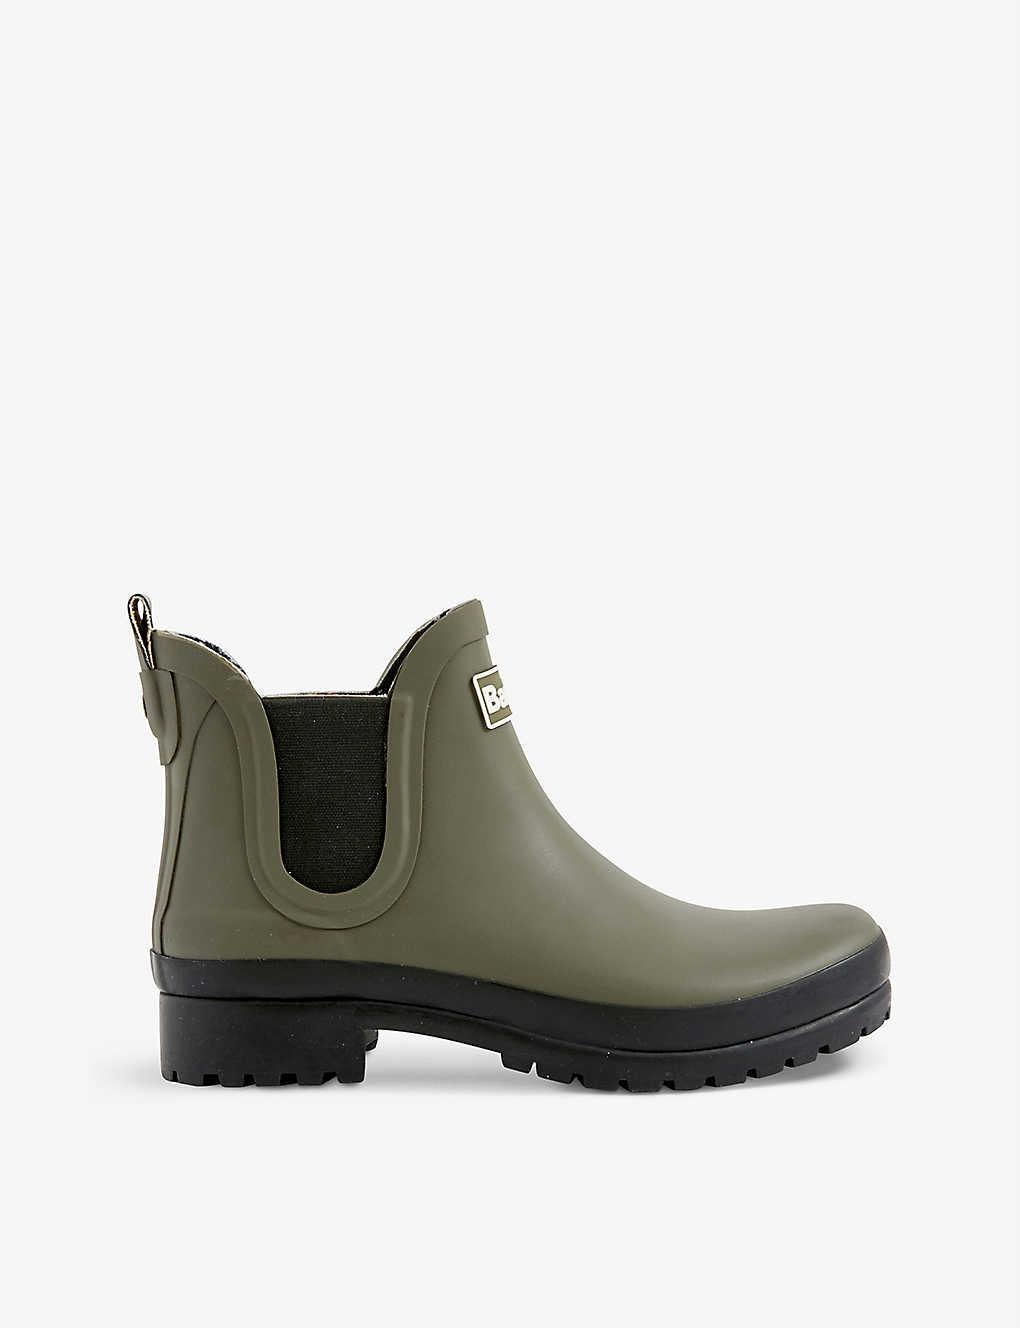 Barbour Mallow Branded Rubber Wellington Boots in Green | Lyst